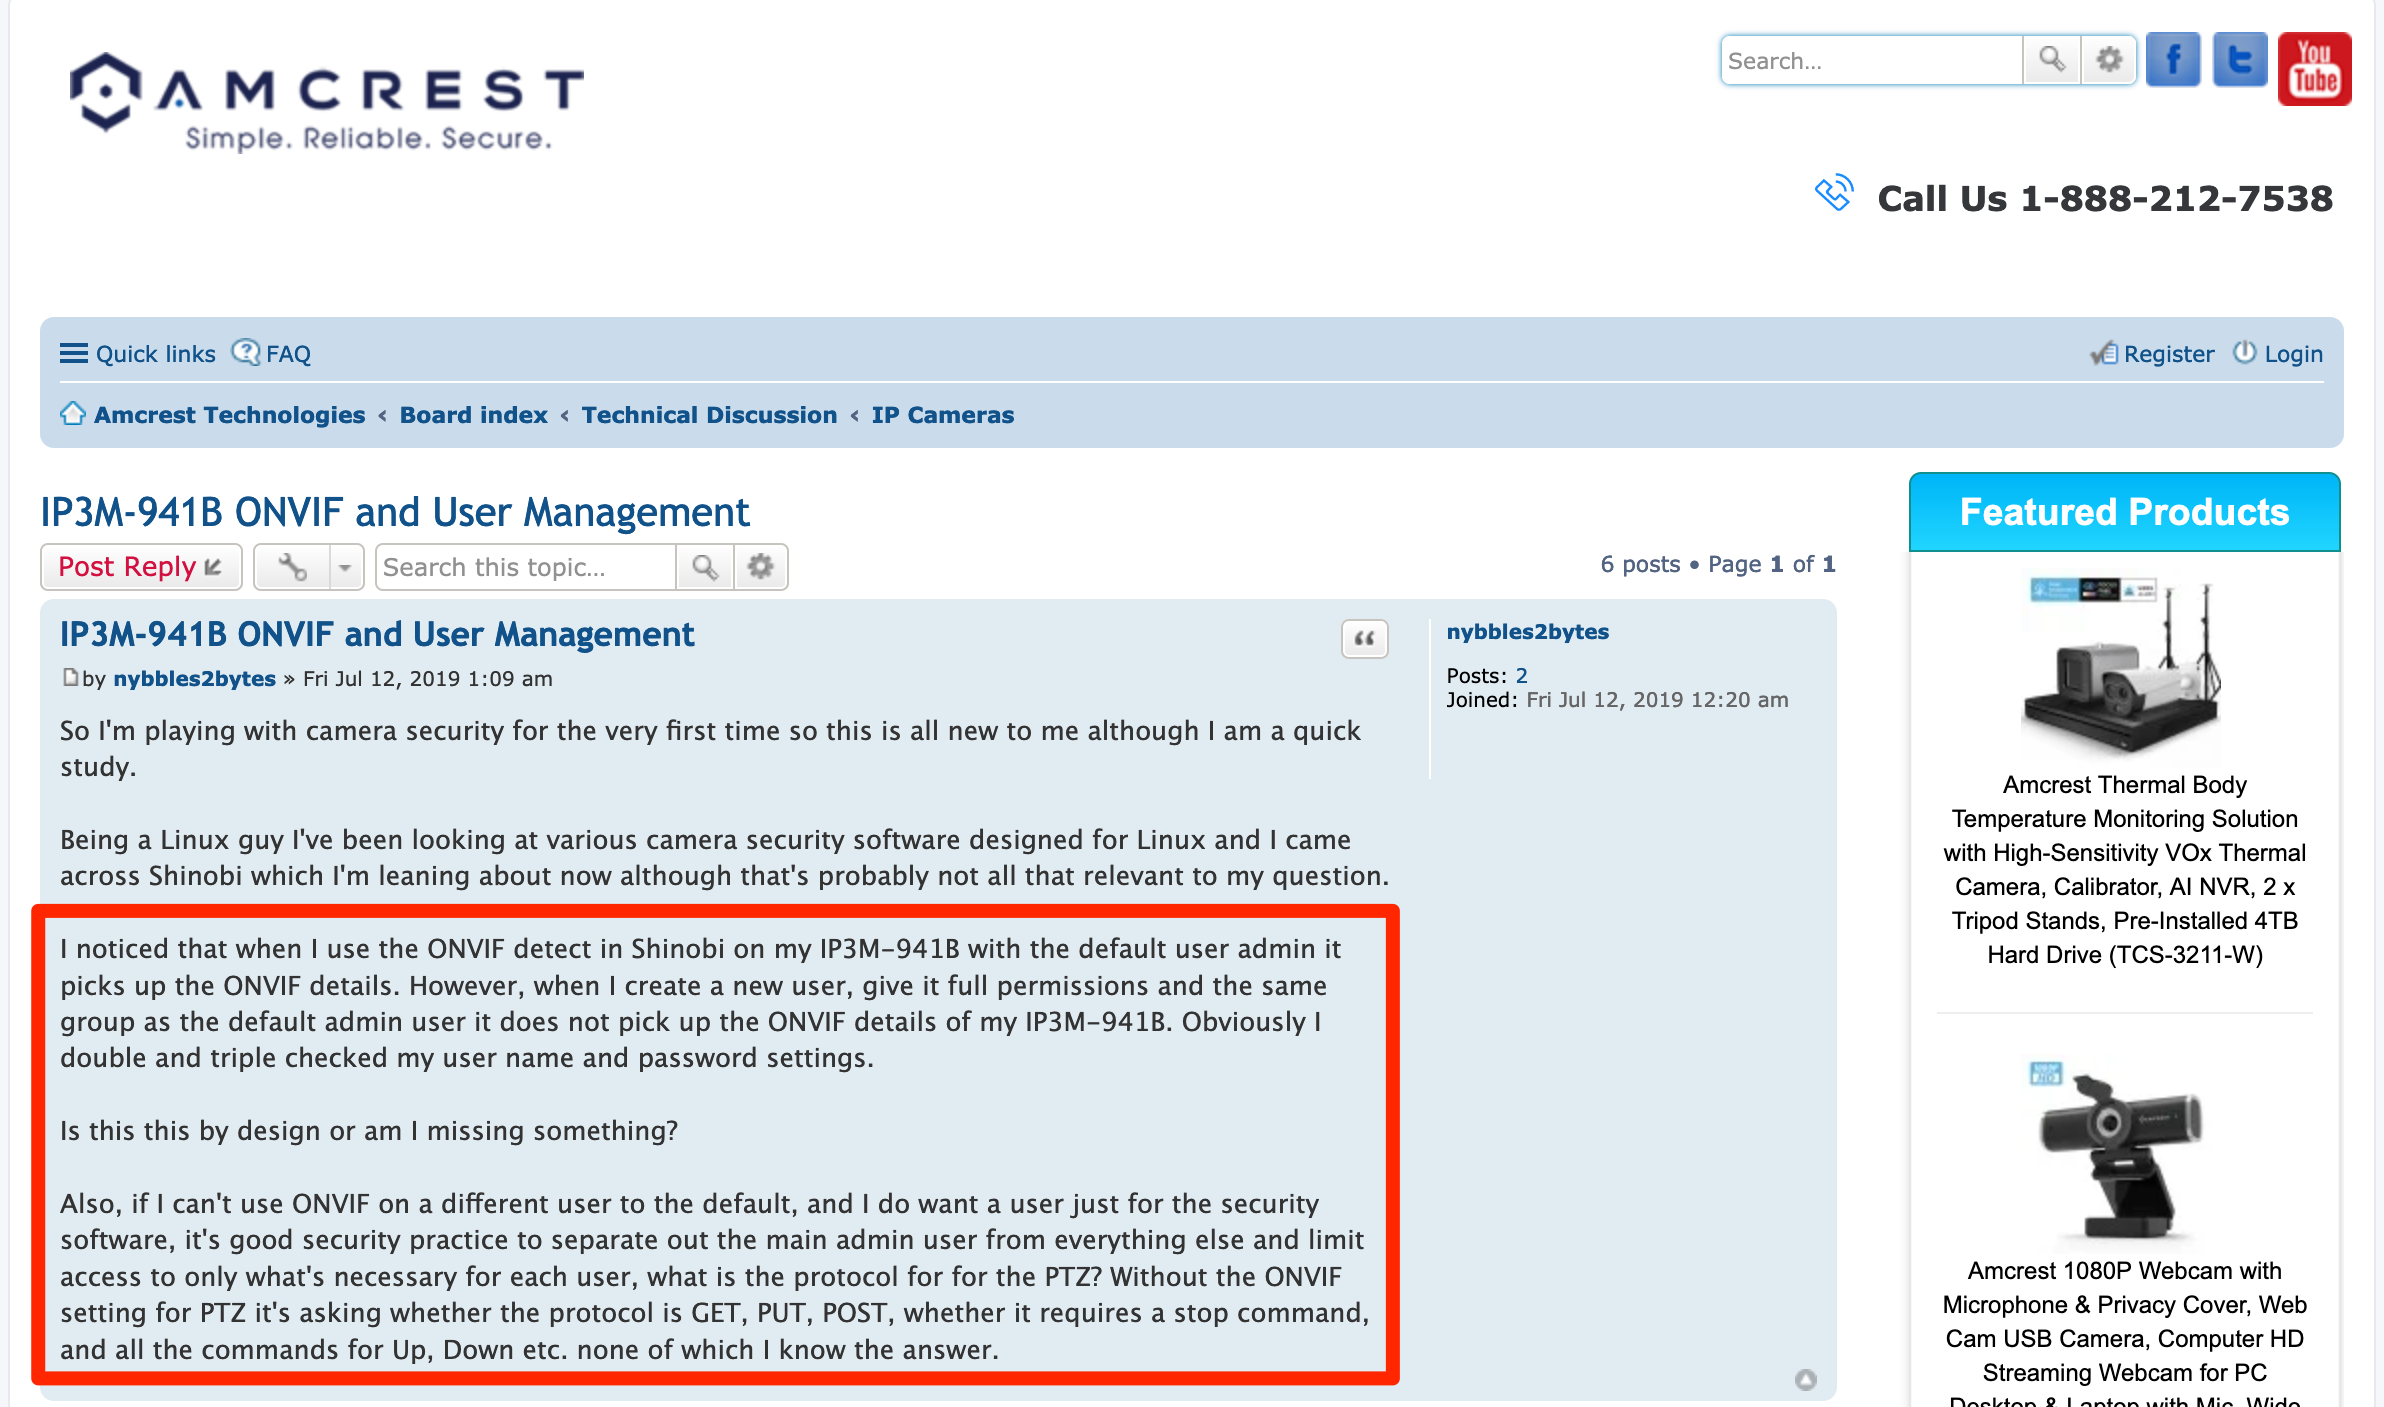 Screenshot showing a post on the amcrest support forums where other people have noticed the lack of multi-user authentication for ONVIF authentication